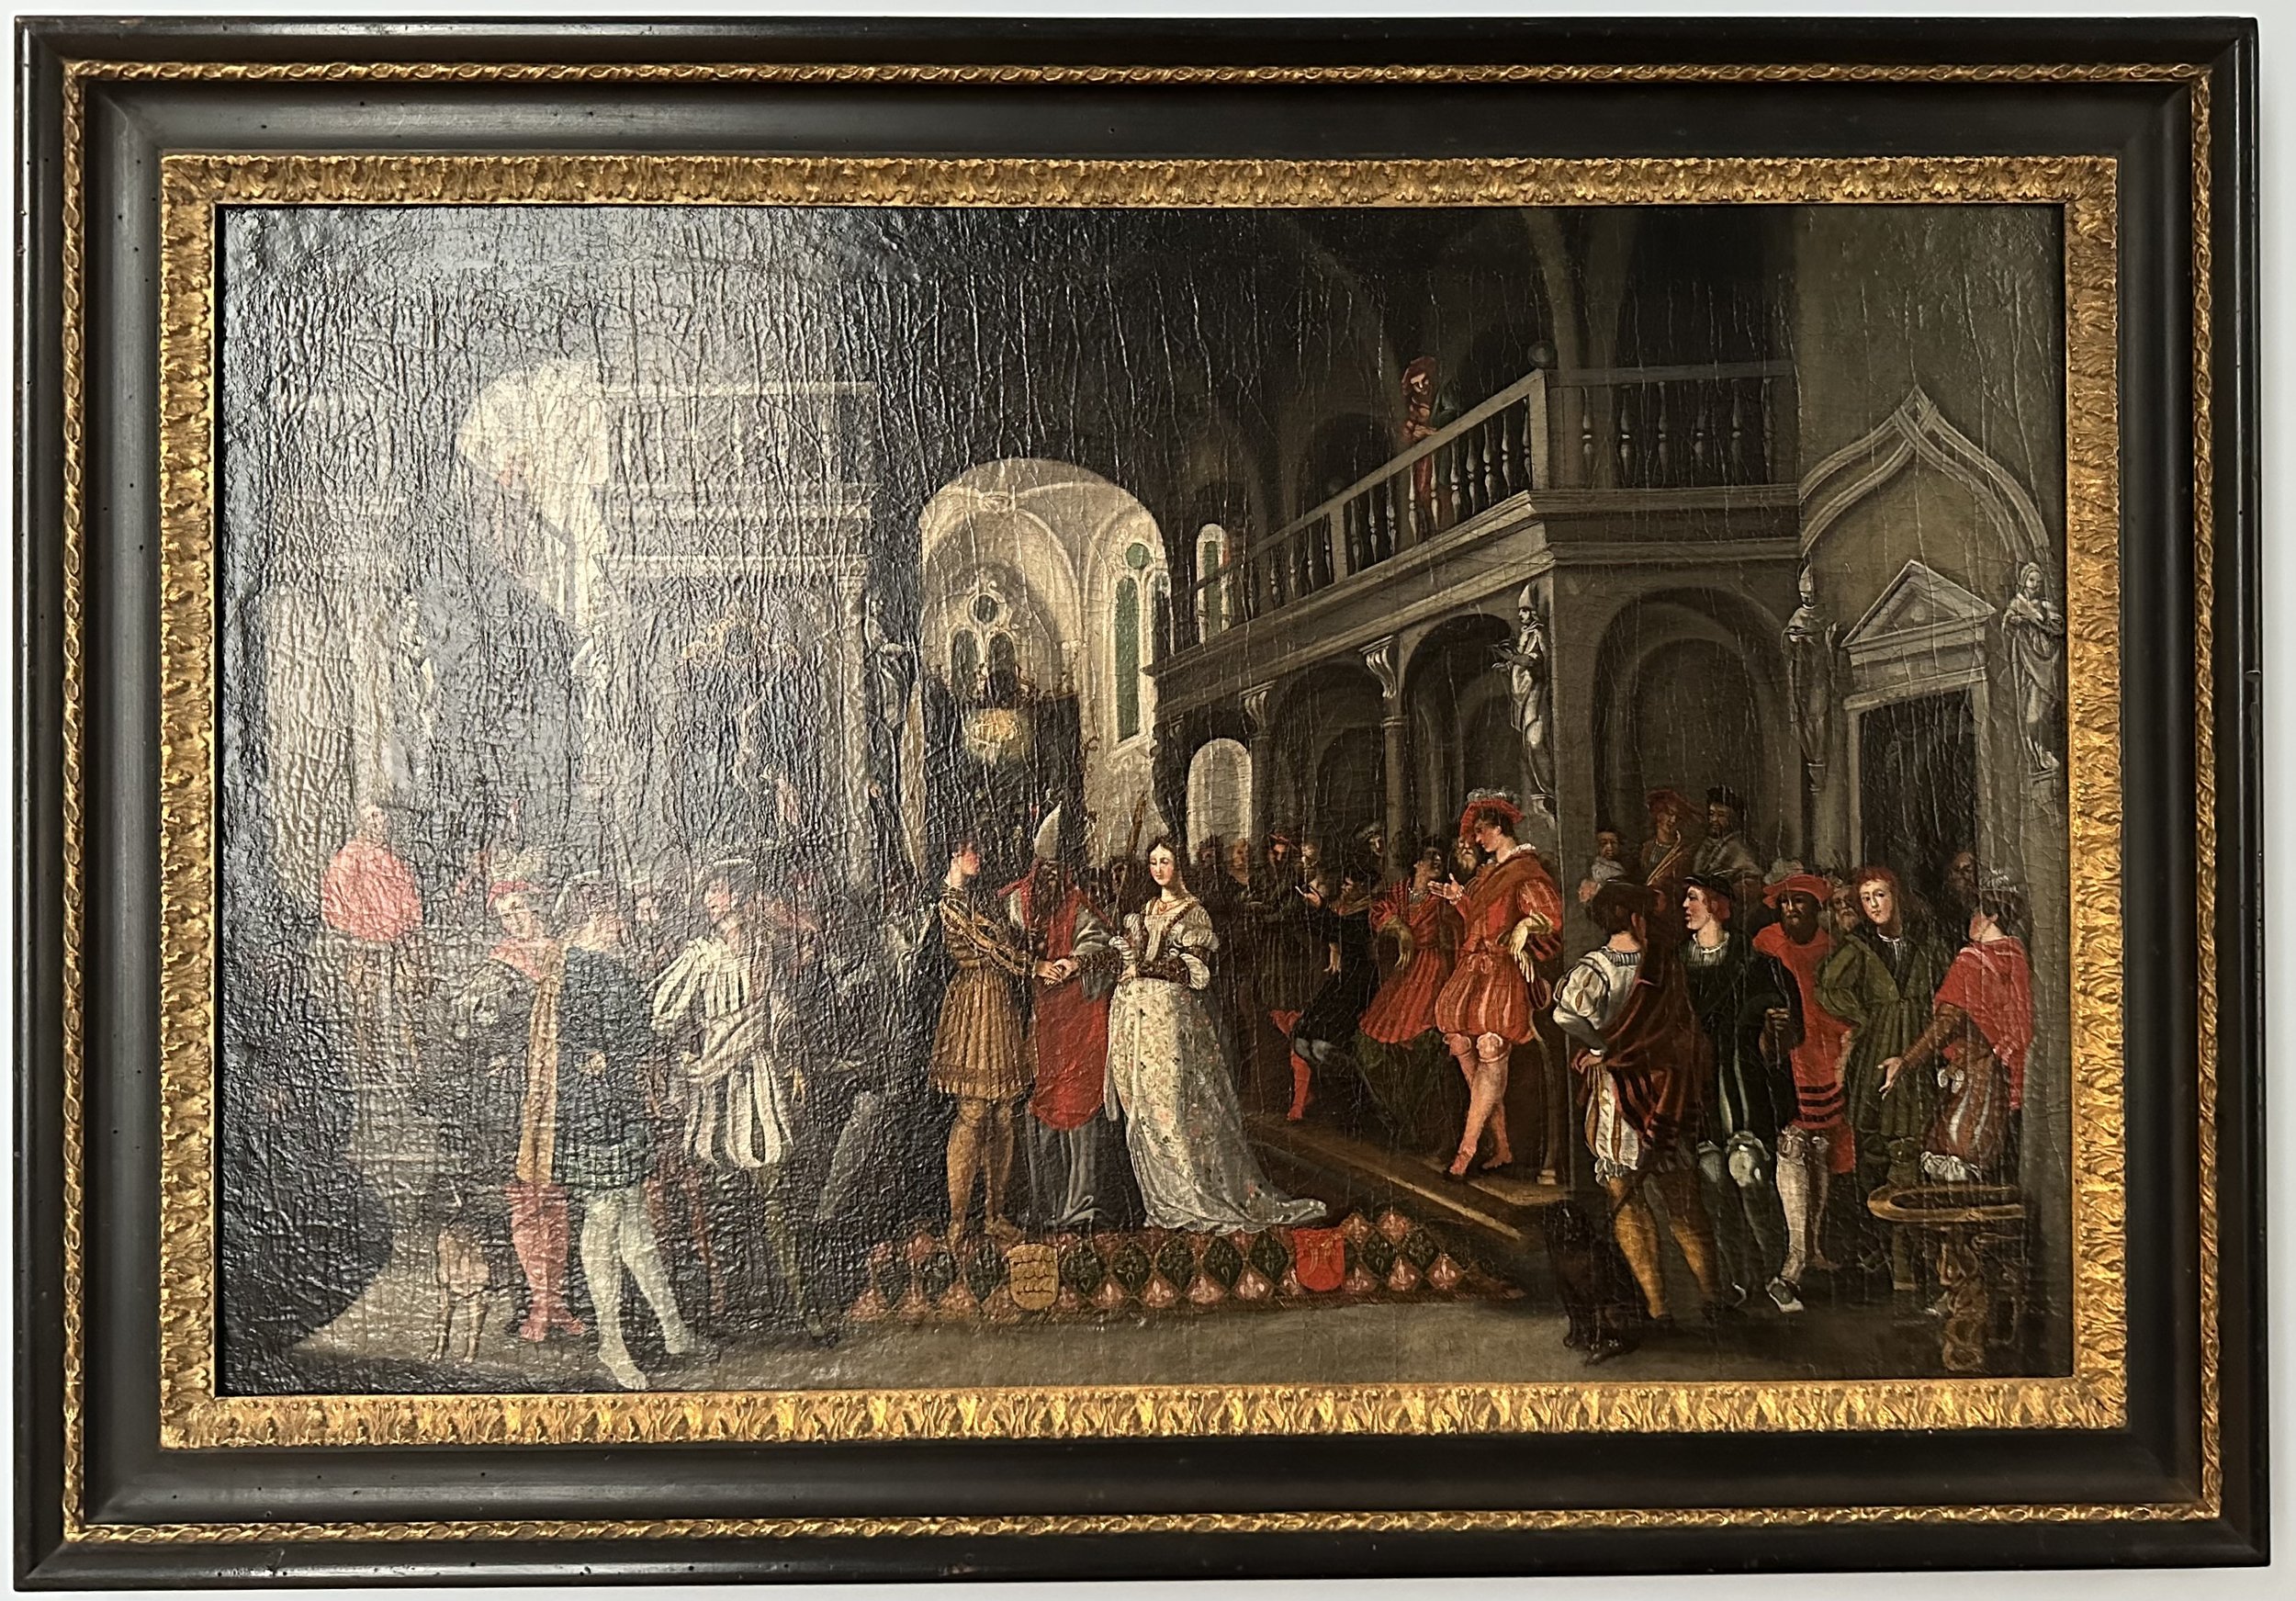 1605 Marriage od Count Eberhard IV of Wurttermberg with Henriette von Montbeliard-Montfaucon by Georg Donauer Landesmuseum Wurttemberg.jpeg